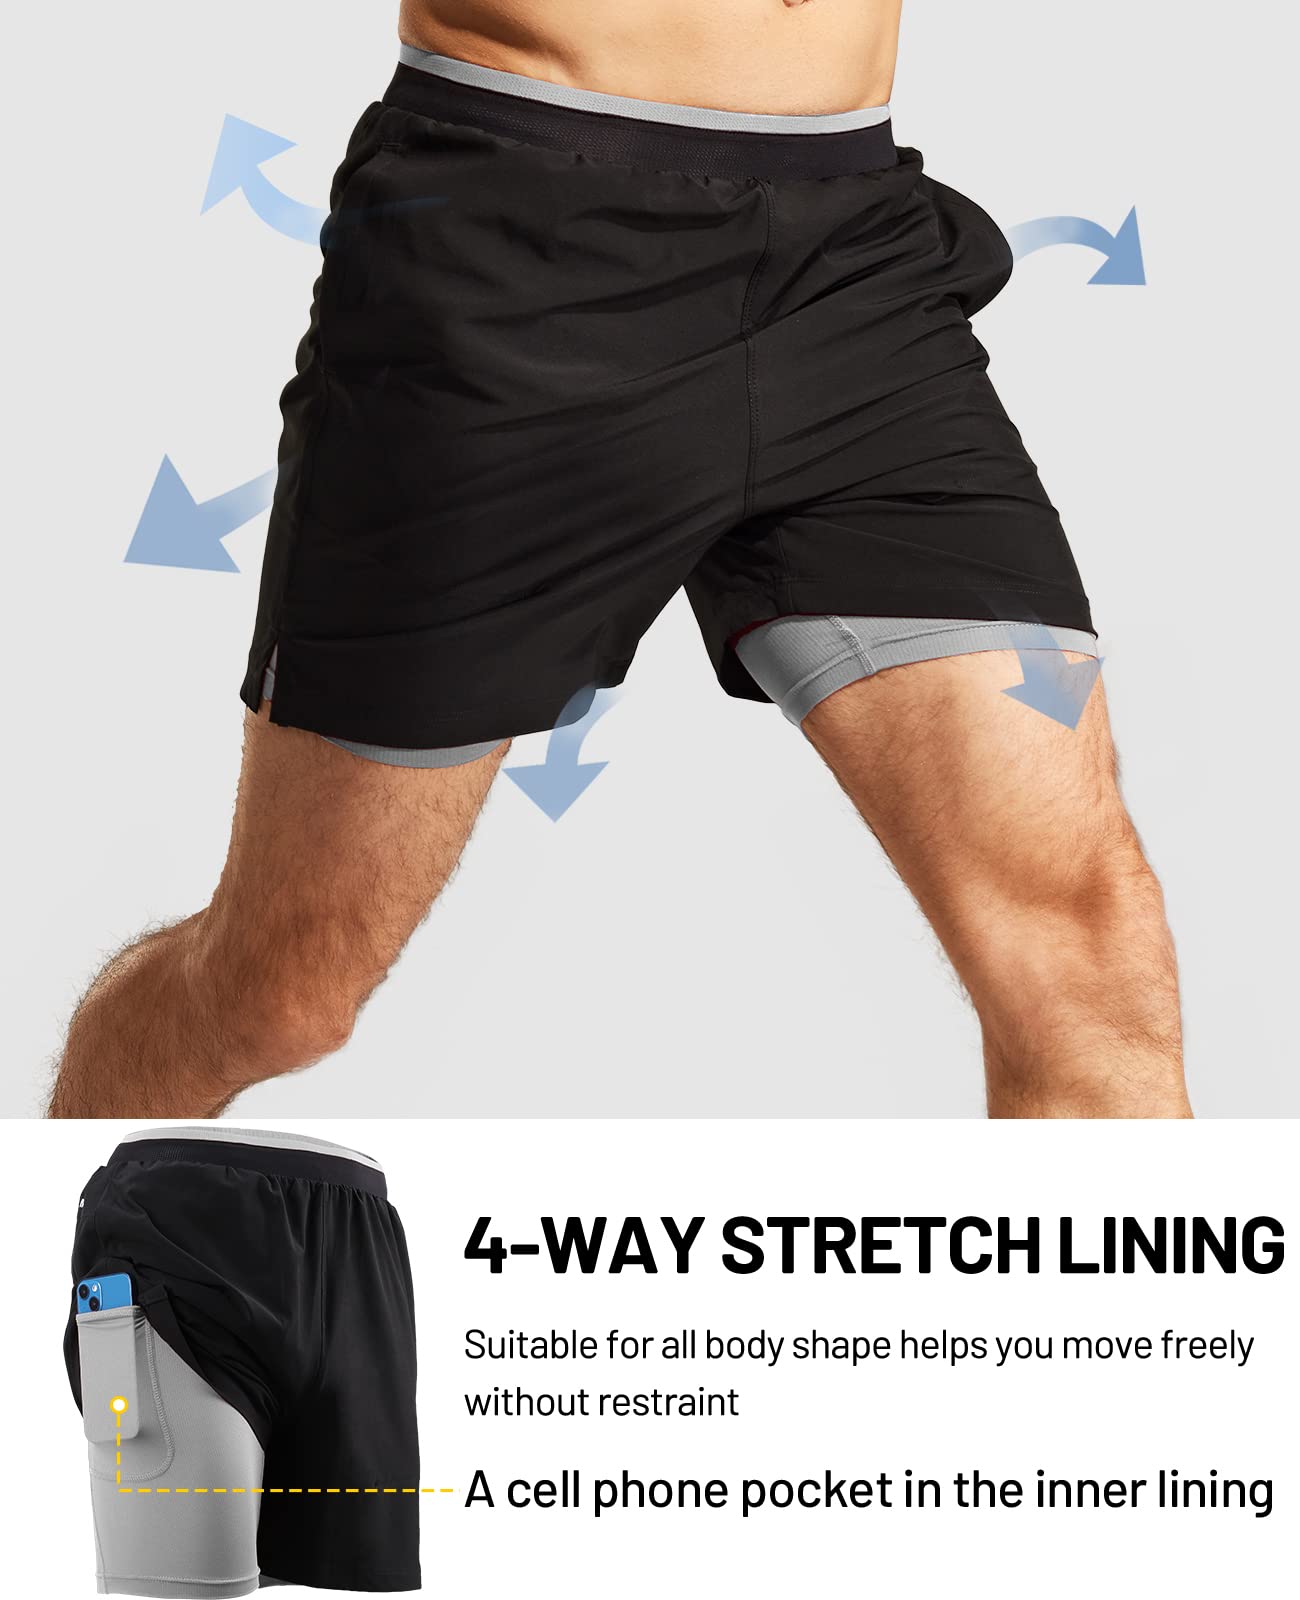 Men's 2 in 1 Running Shorts with Liner 5" Quick Dry Athletic Shorts Men's Shorts MIER